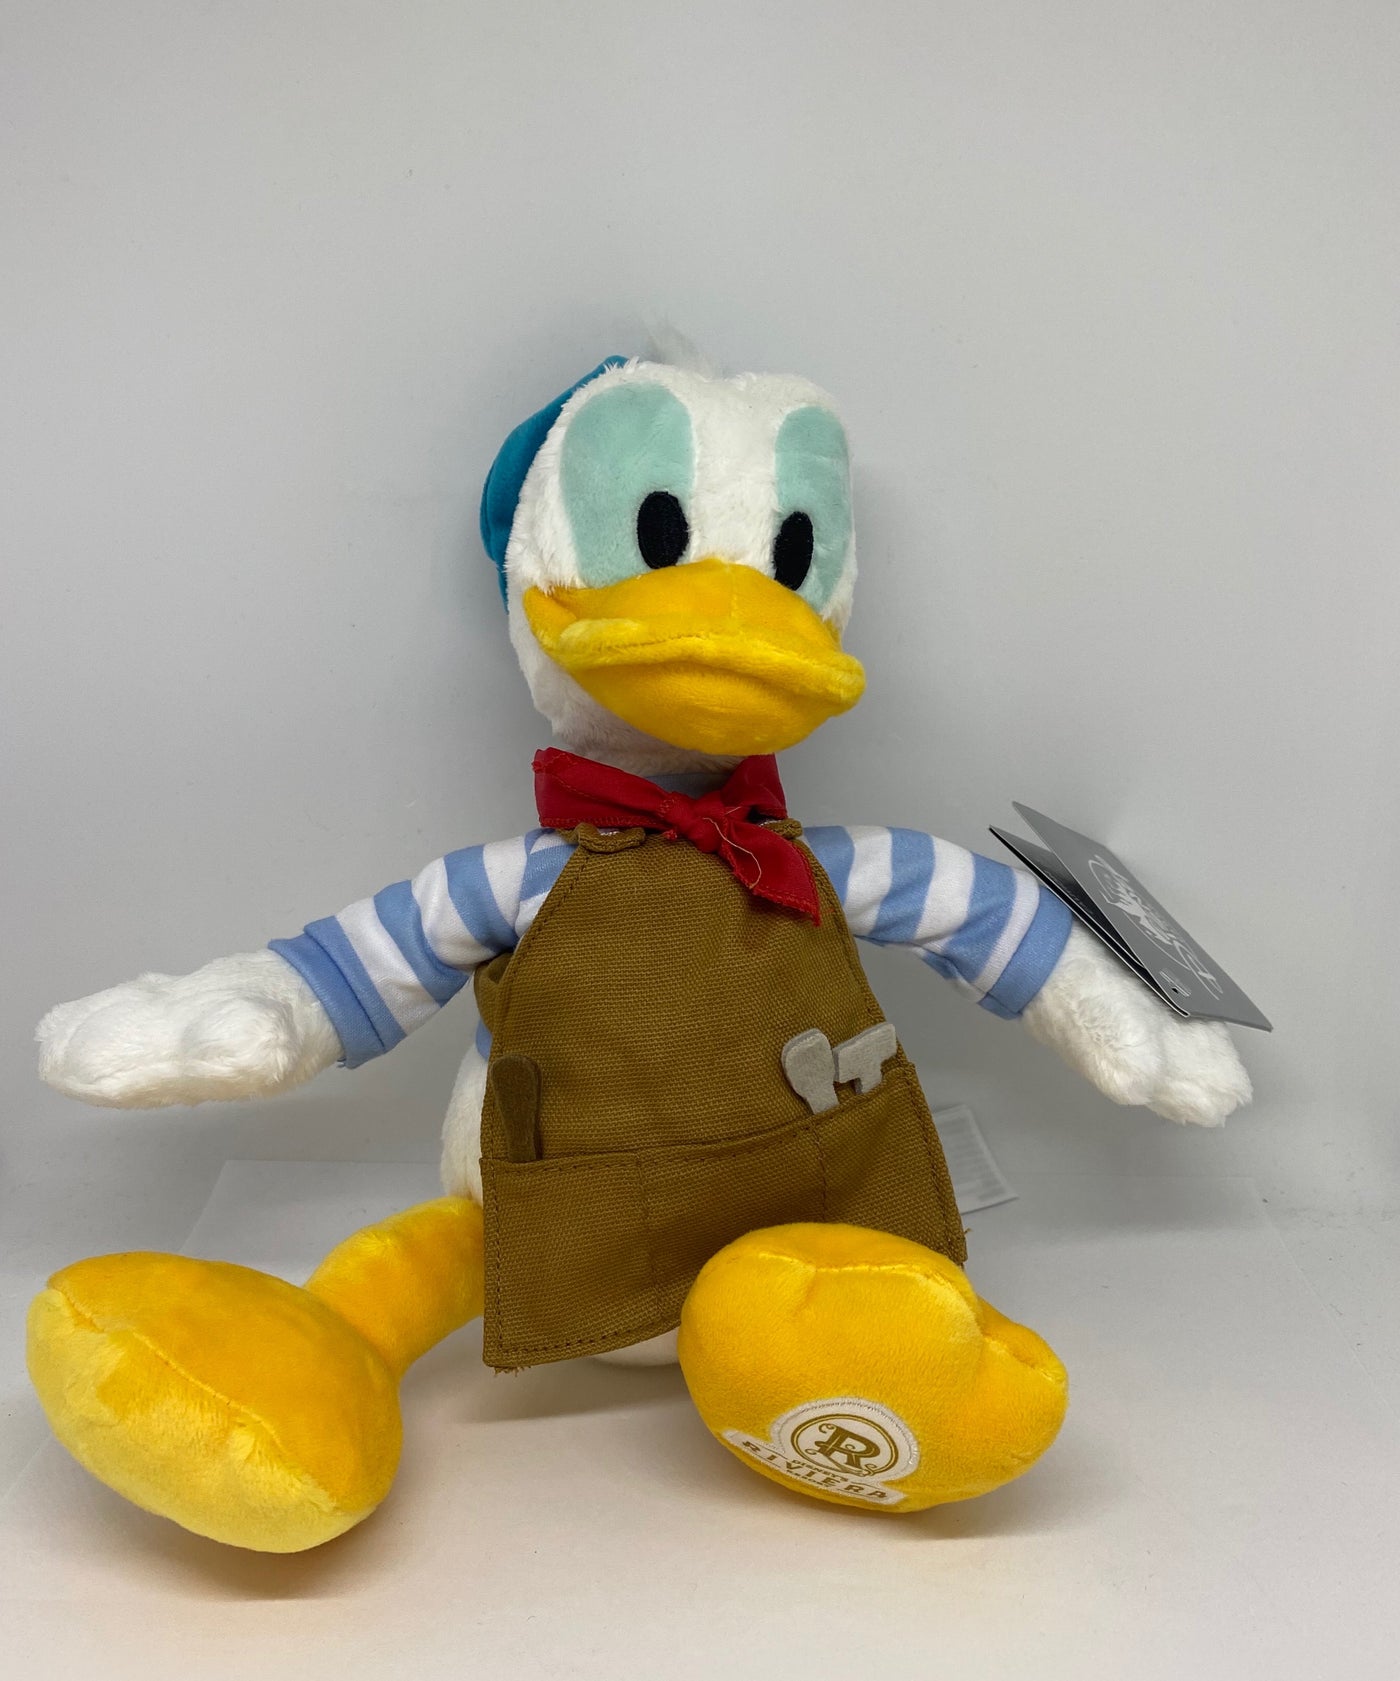 Disney Parks Riviera Resort Donald Duck Sculptor Plush New with Tags